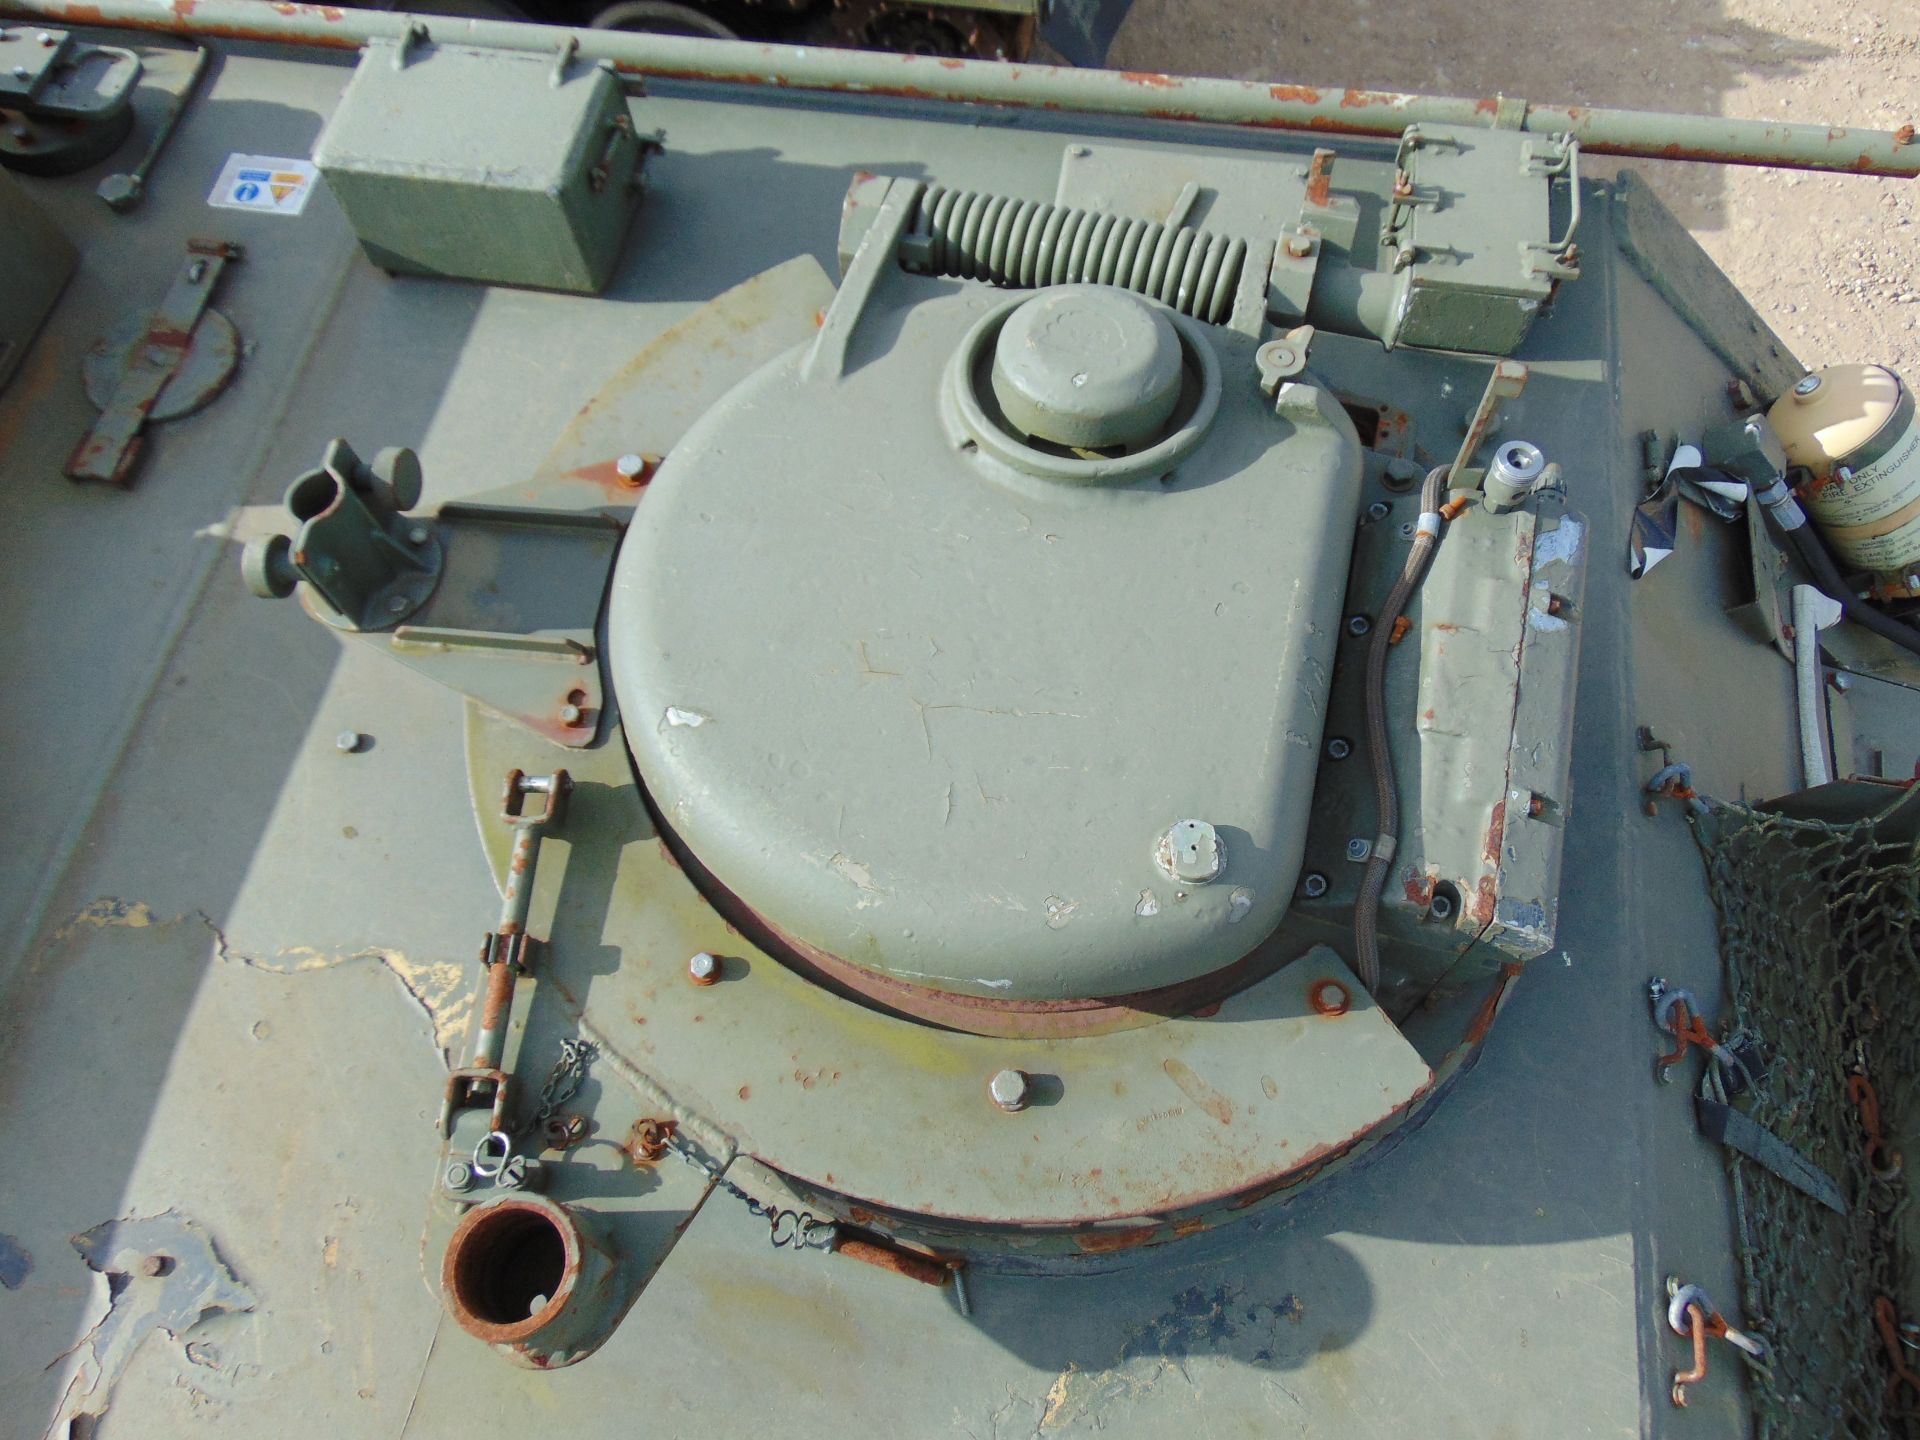 CVRT (Combat Vehicle Reconnaissance Tracked) FV105 Sultan Armoured Personnel Carrier - Image 13 of 25